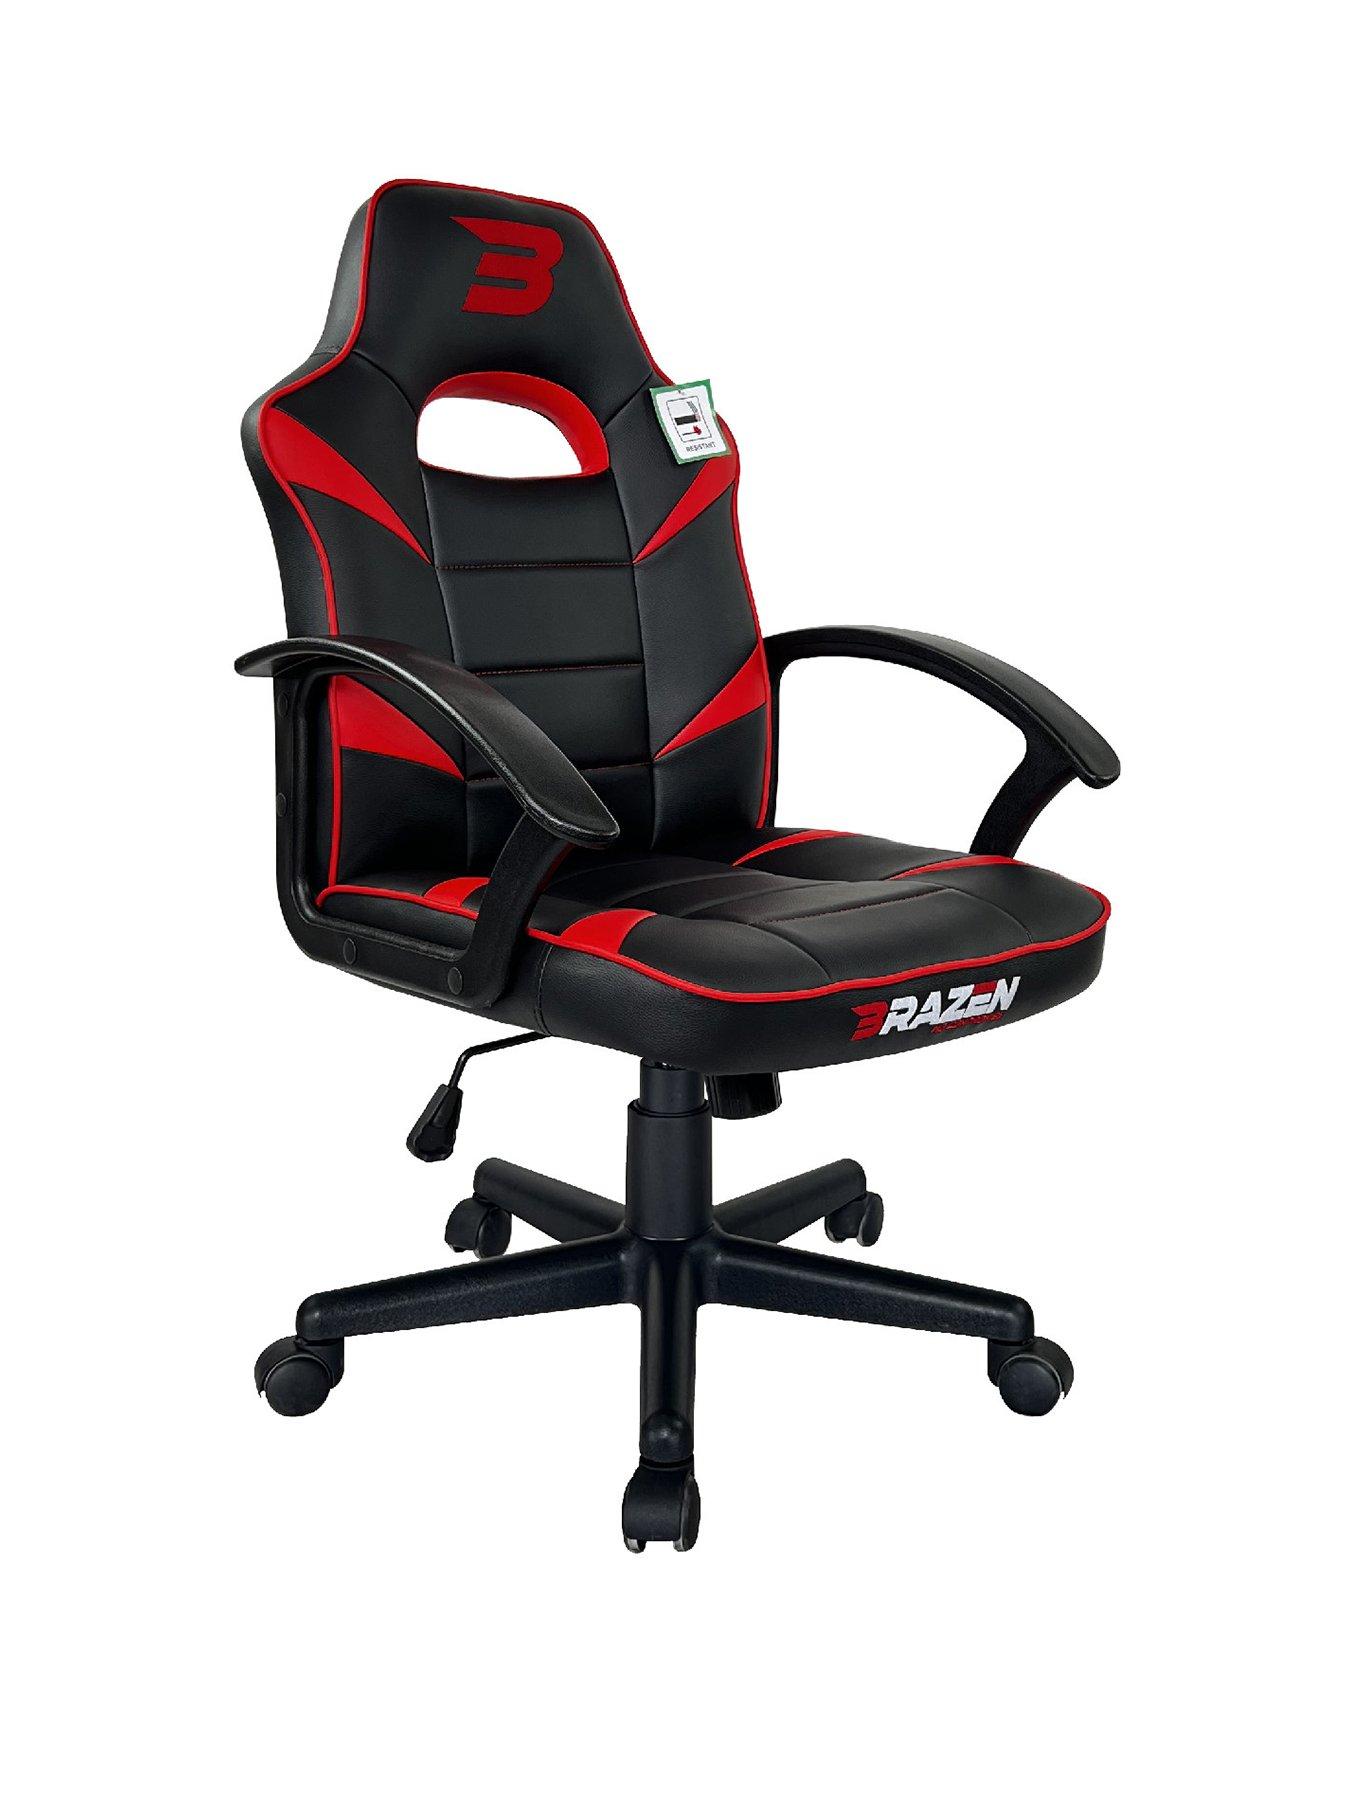 Brazen Valor Mid Back Pc Gaming Chair - Red